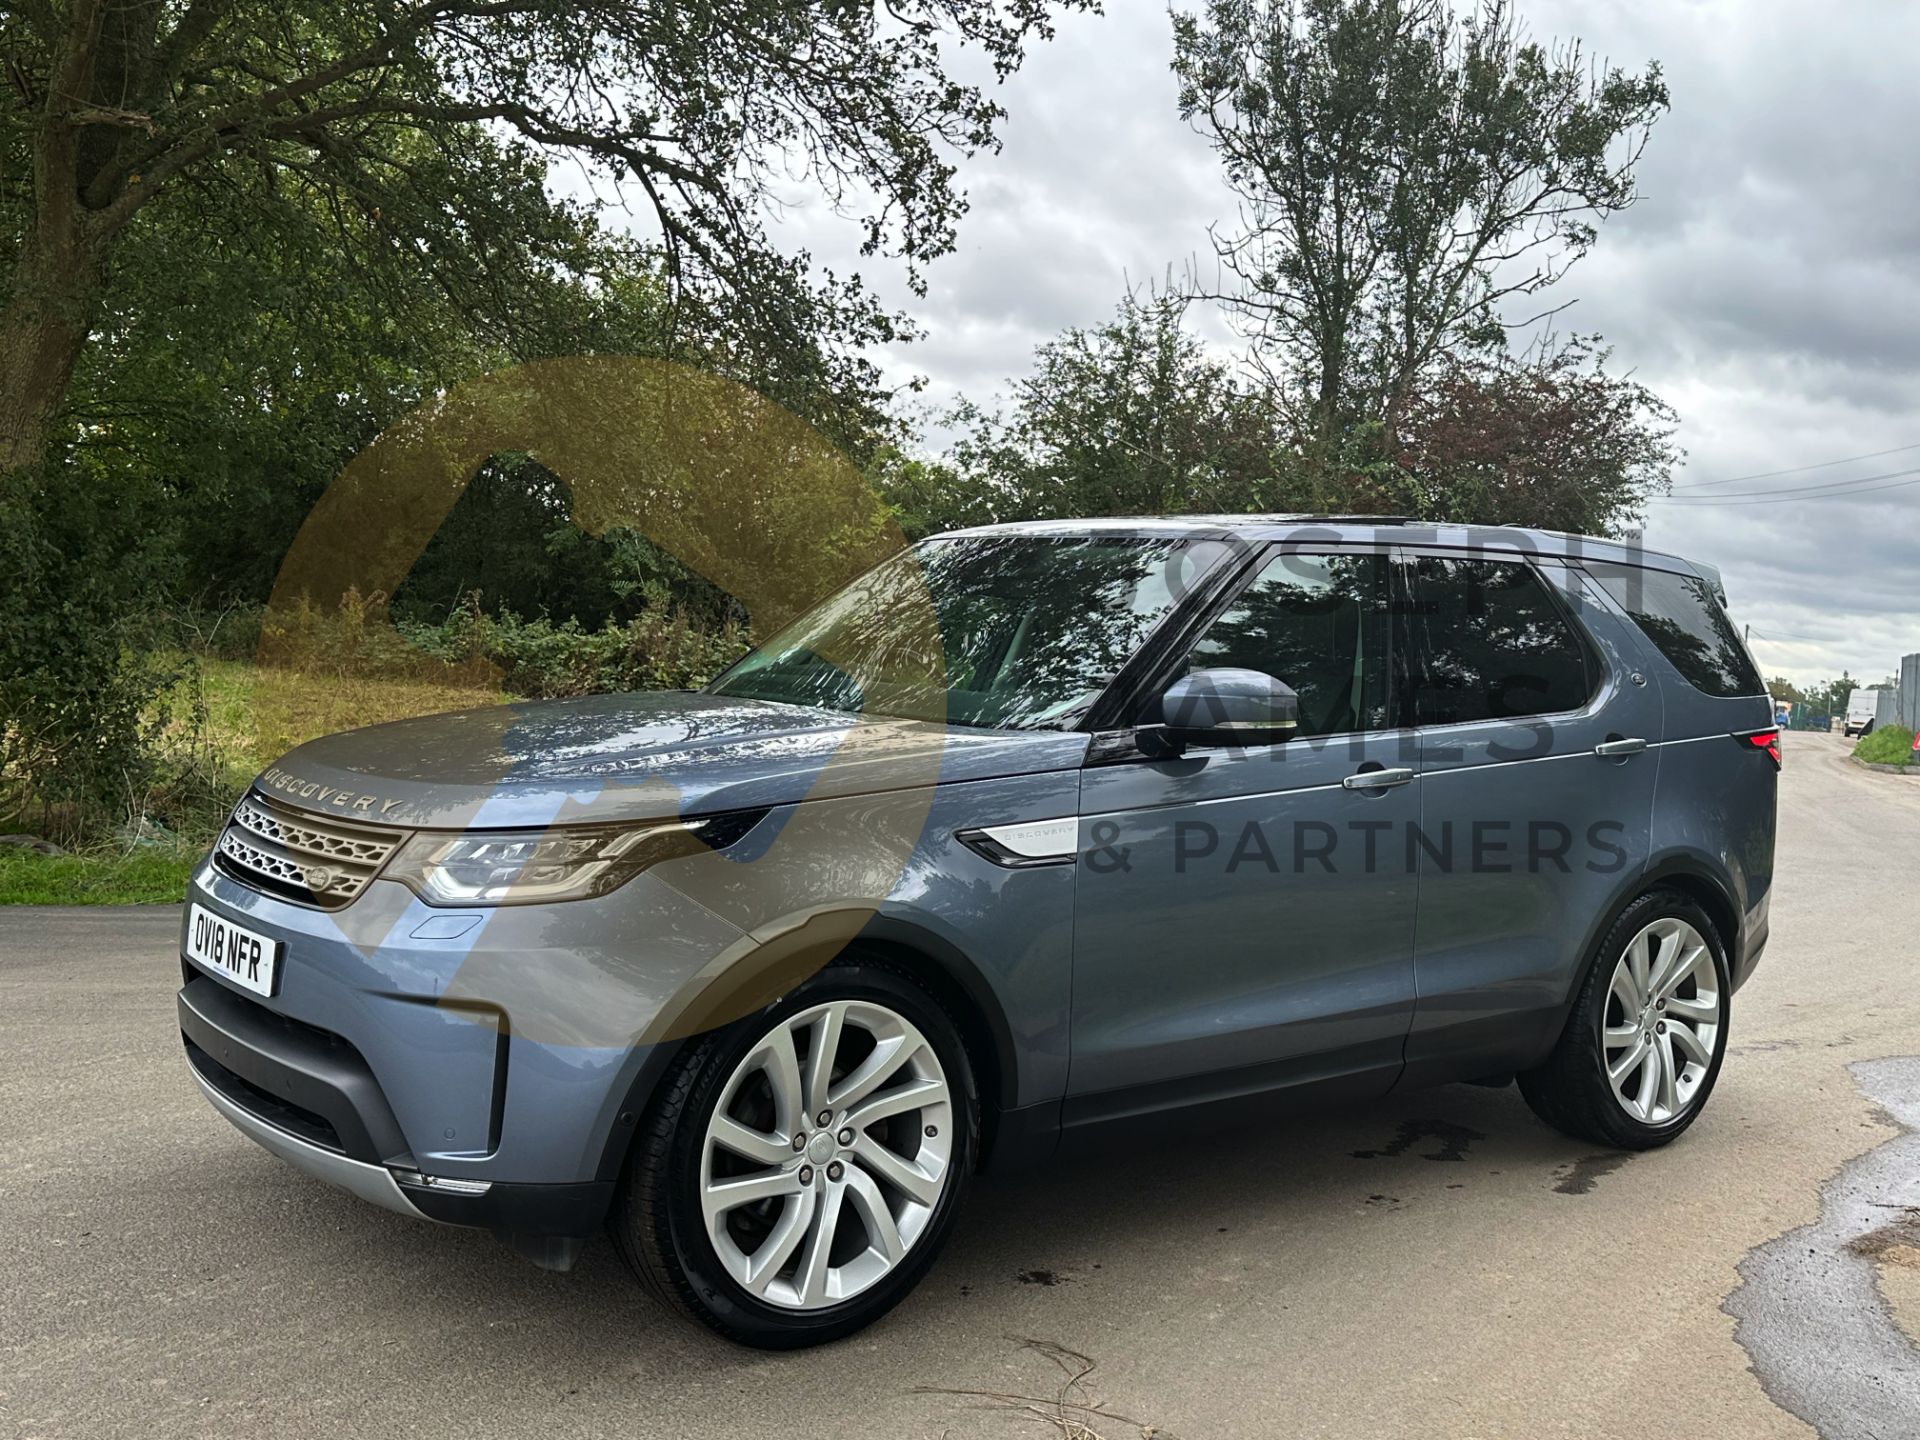 (ON SALE) LAND ROVER DISCOVERY 5 *HSE LUXURY* 7 SEATER SUV (2018 - FACELIFT MODEL) (LOW MILEAGE) - Image 7 of 66